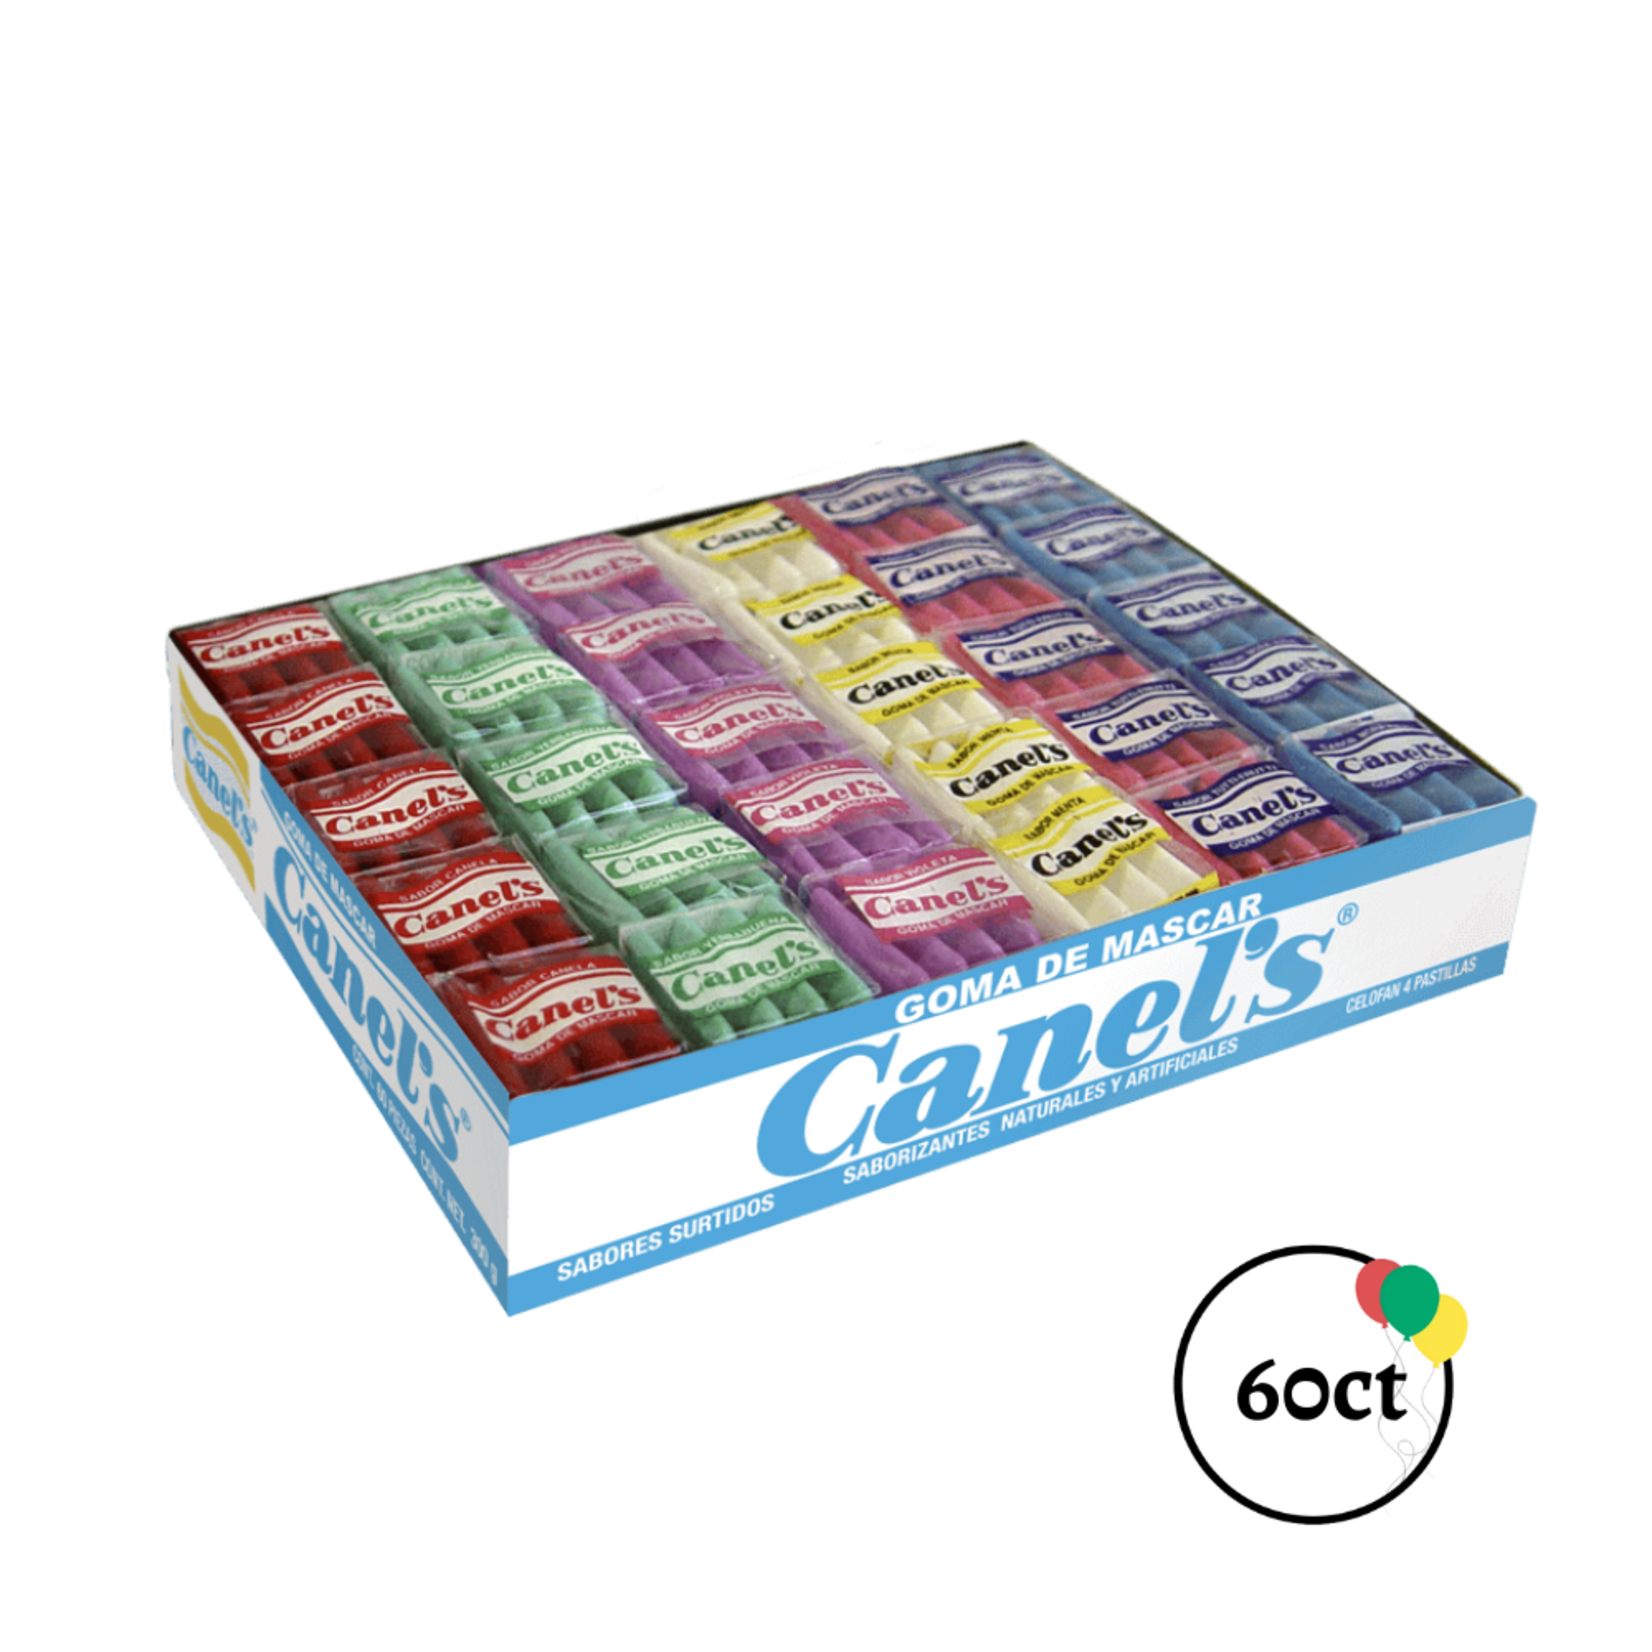 Canel's Canel's Chewing Gum 60ct